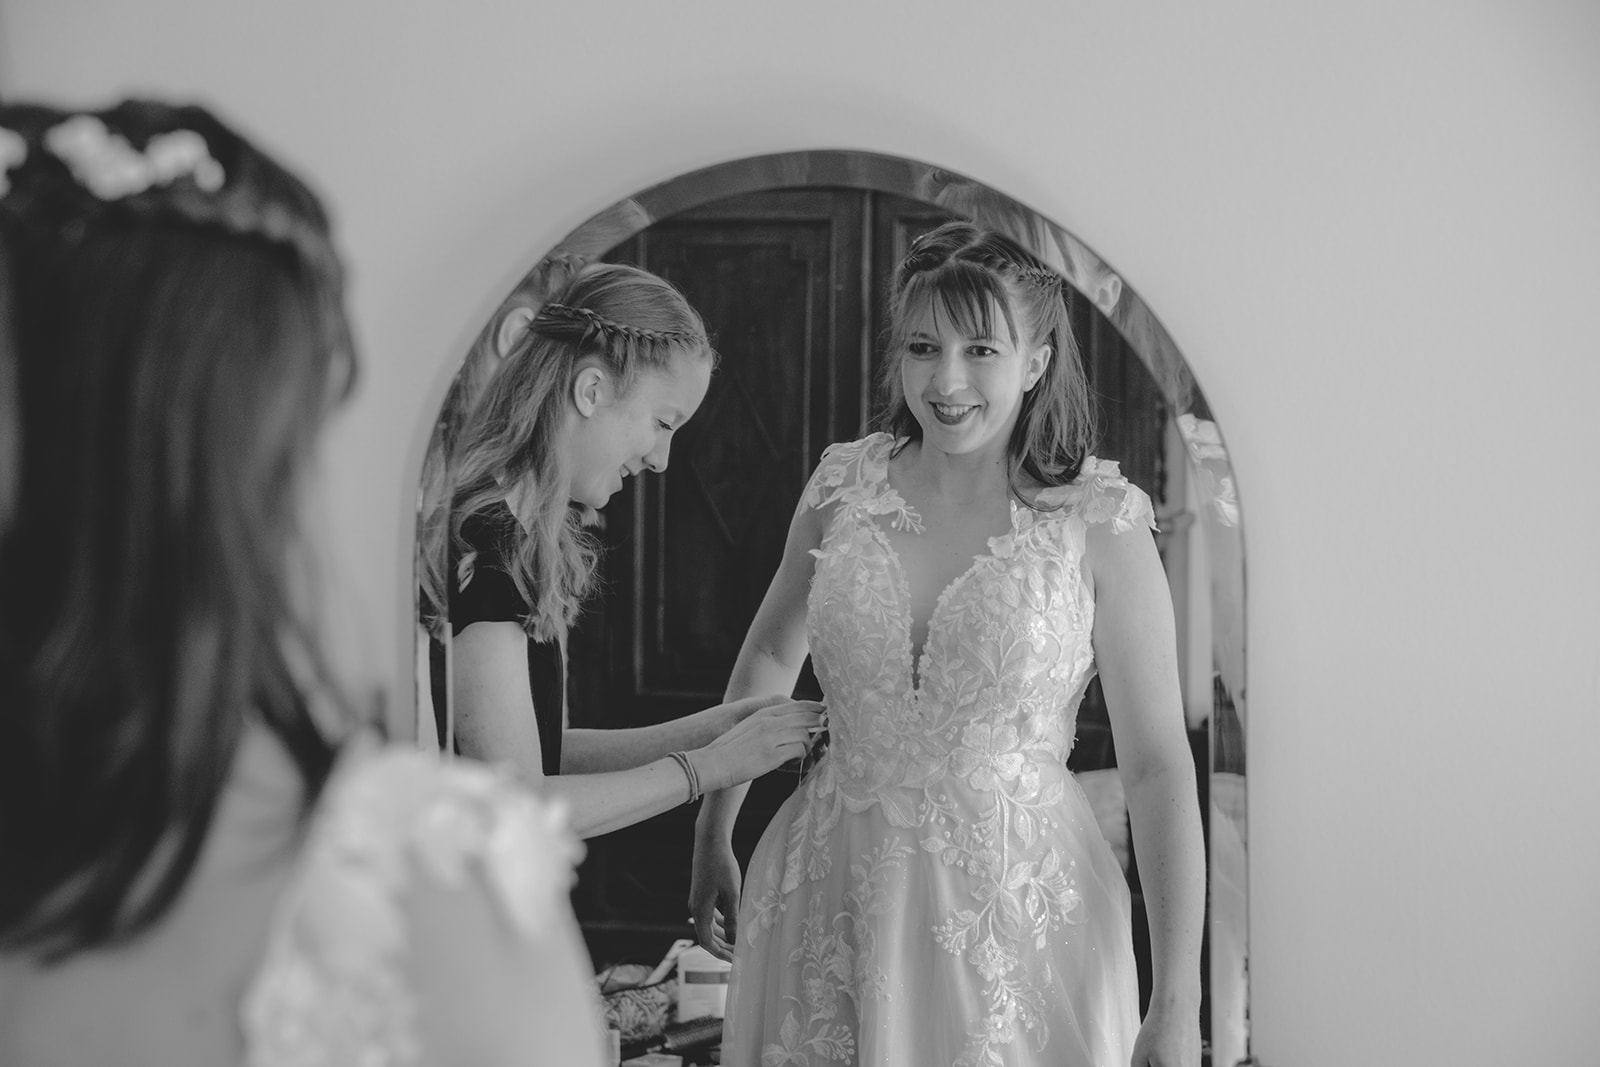 Bride getting dressed with help from her sister with the dress